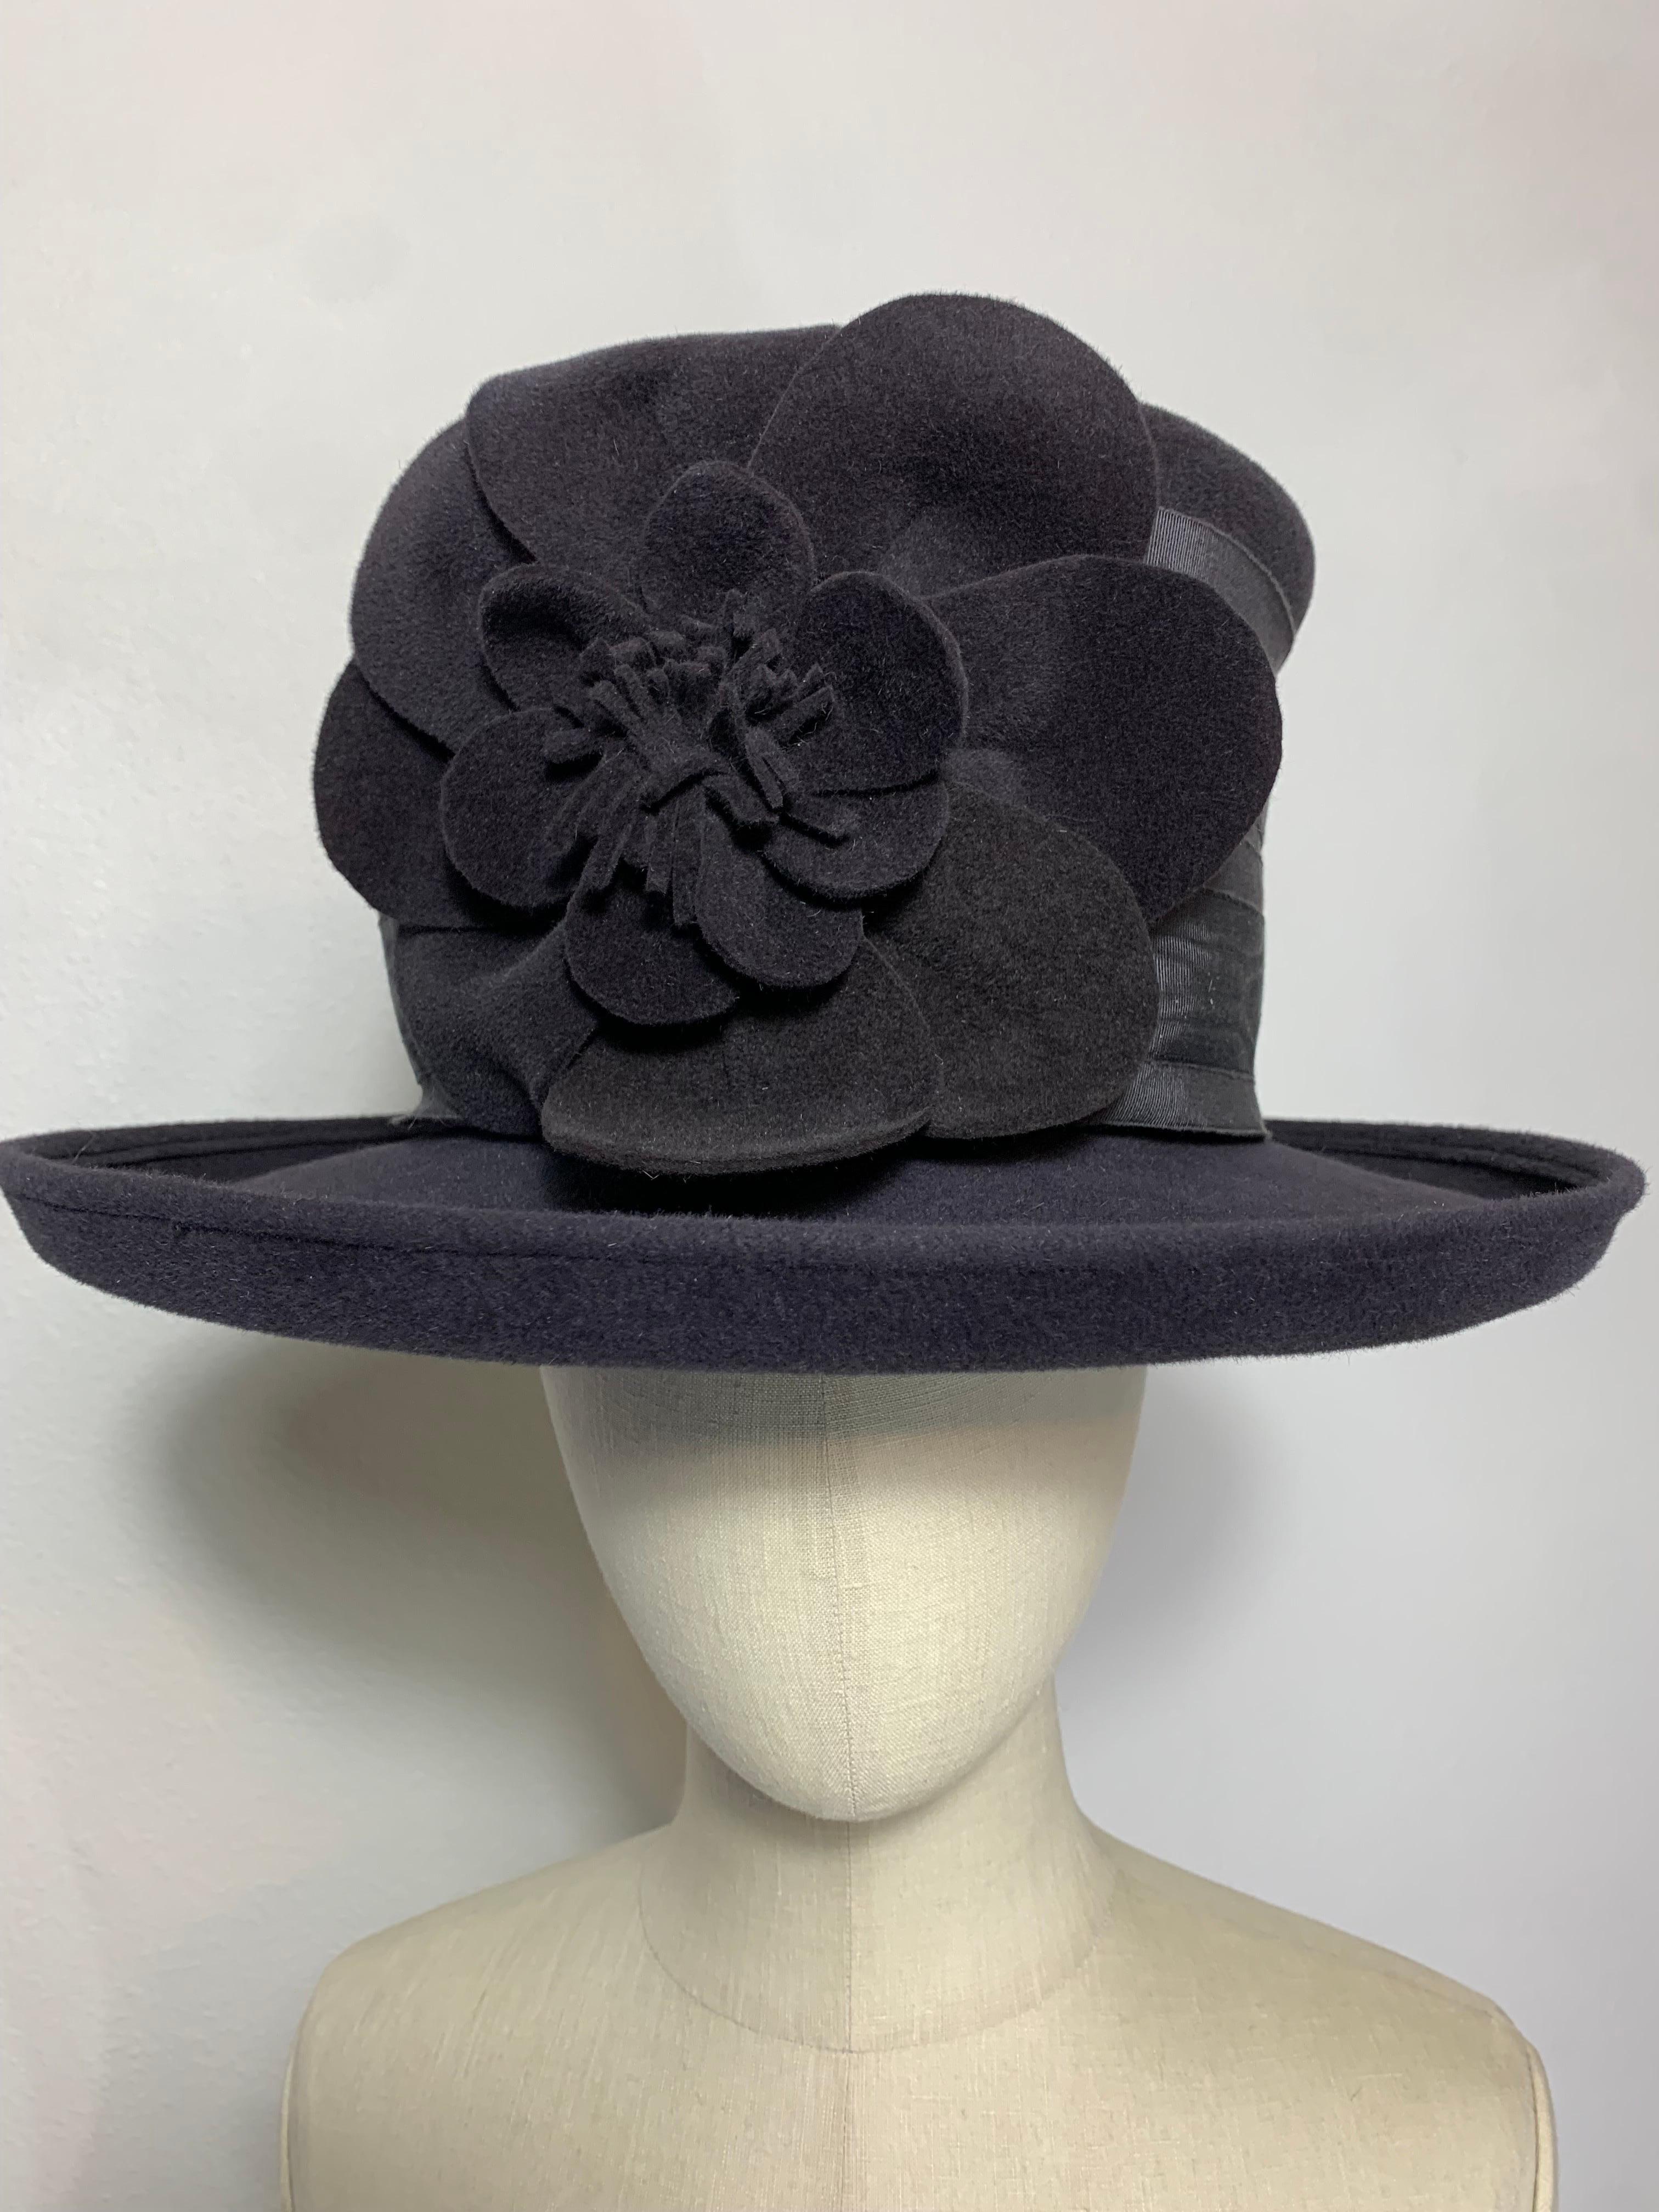 Maison Michel Autumn/Winter Short Brim Charcoal Fur Felt  Beautifully Blocked High Top Hat with Matching Flower and Wide Moiré Grosgrain Band: Unlabeled, with attached combs for securing. Size 6 7/8 Medium. Made in France. 

Please visit our 1stDibs